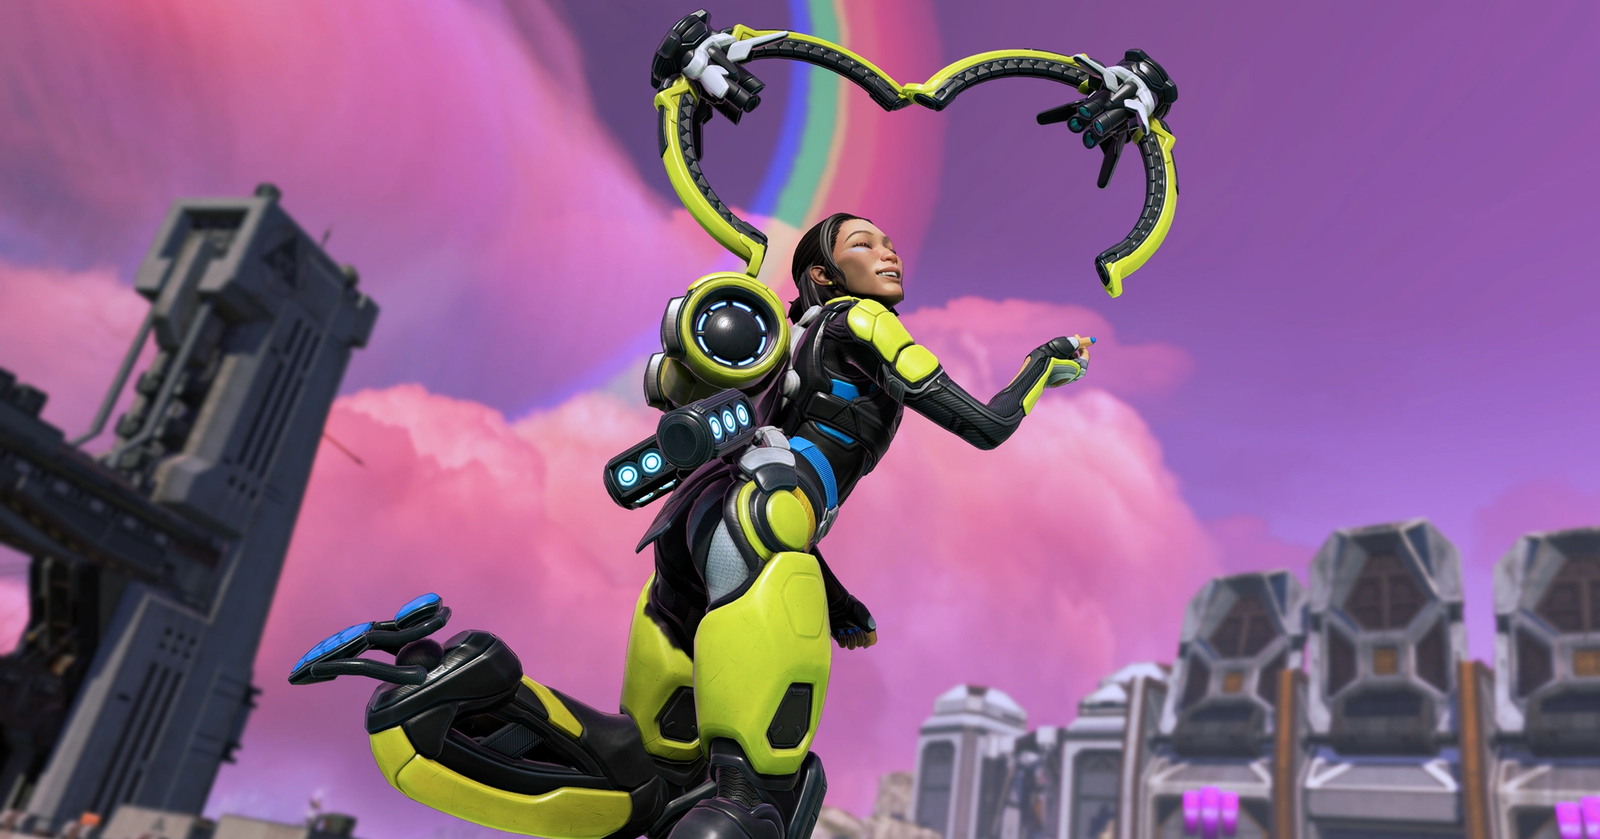 Why did the Mods lock this post? 2 hours later it's still locked? via /r/ Overwatch – OW Highlights